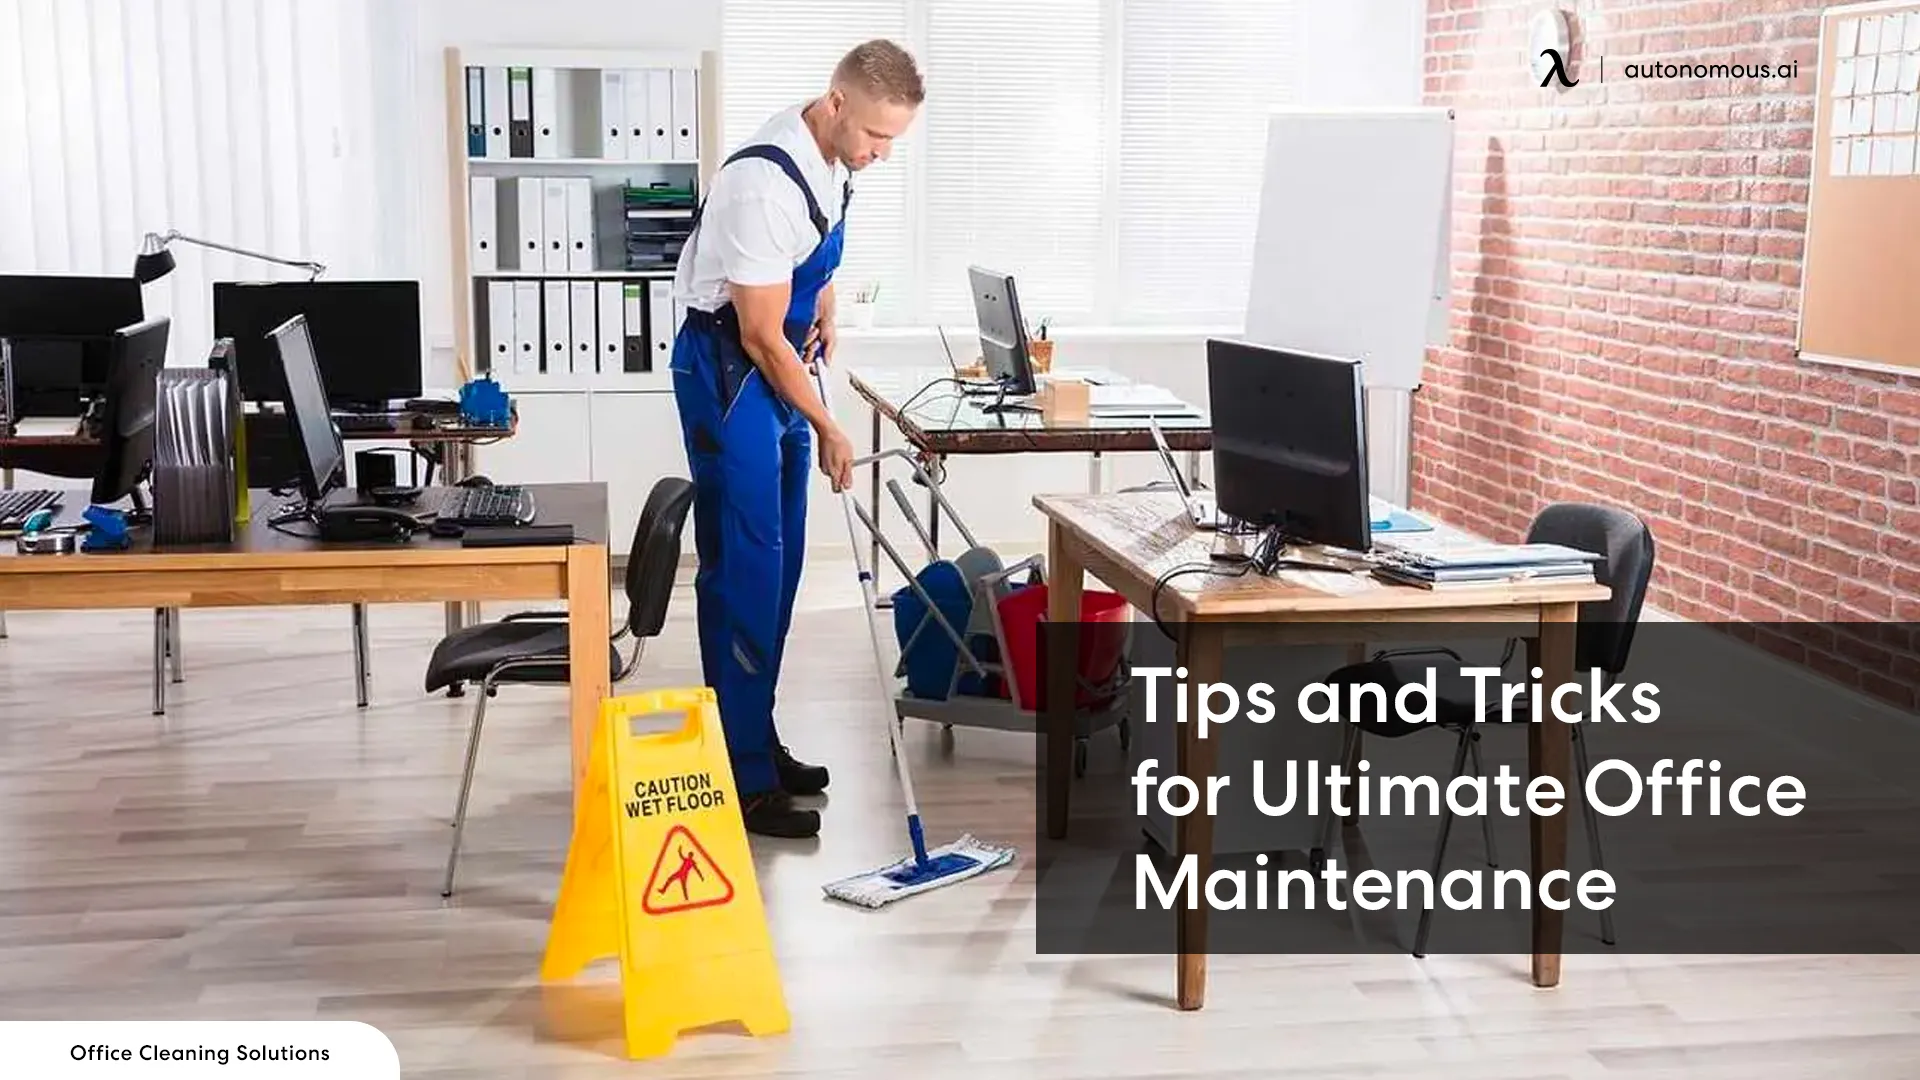 Save Time and Money with These Simple Office Maintenance Hacks